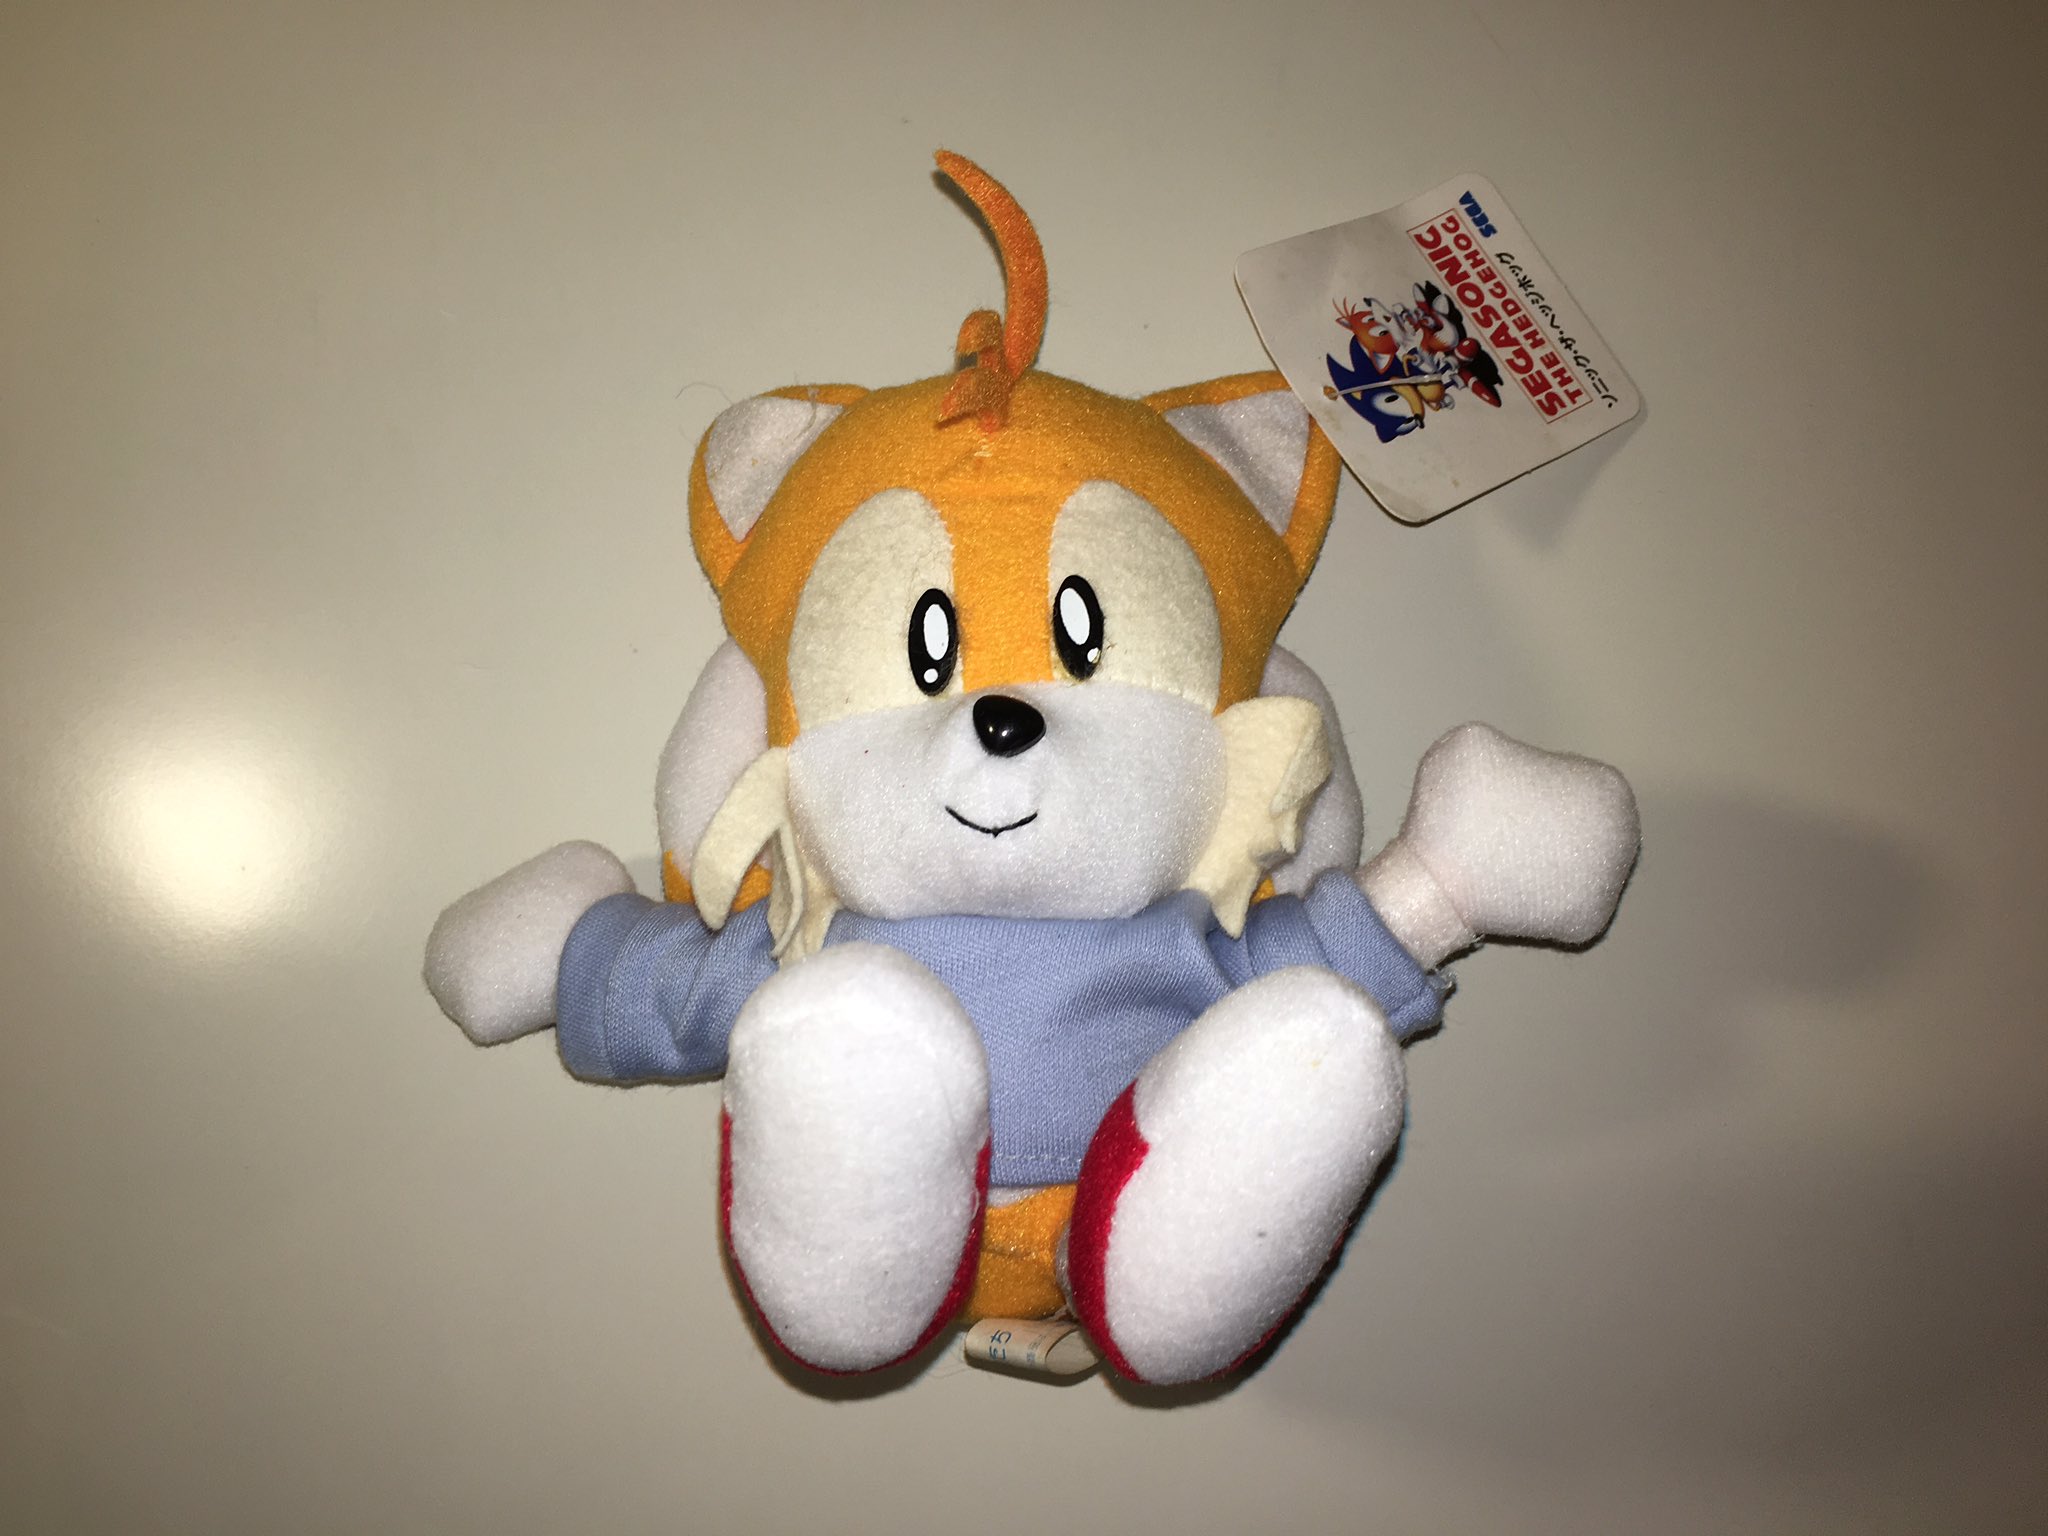 PatMac on X: Huge fan of this Tails in a sweater plush too. What a guy.   / X